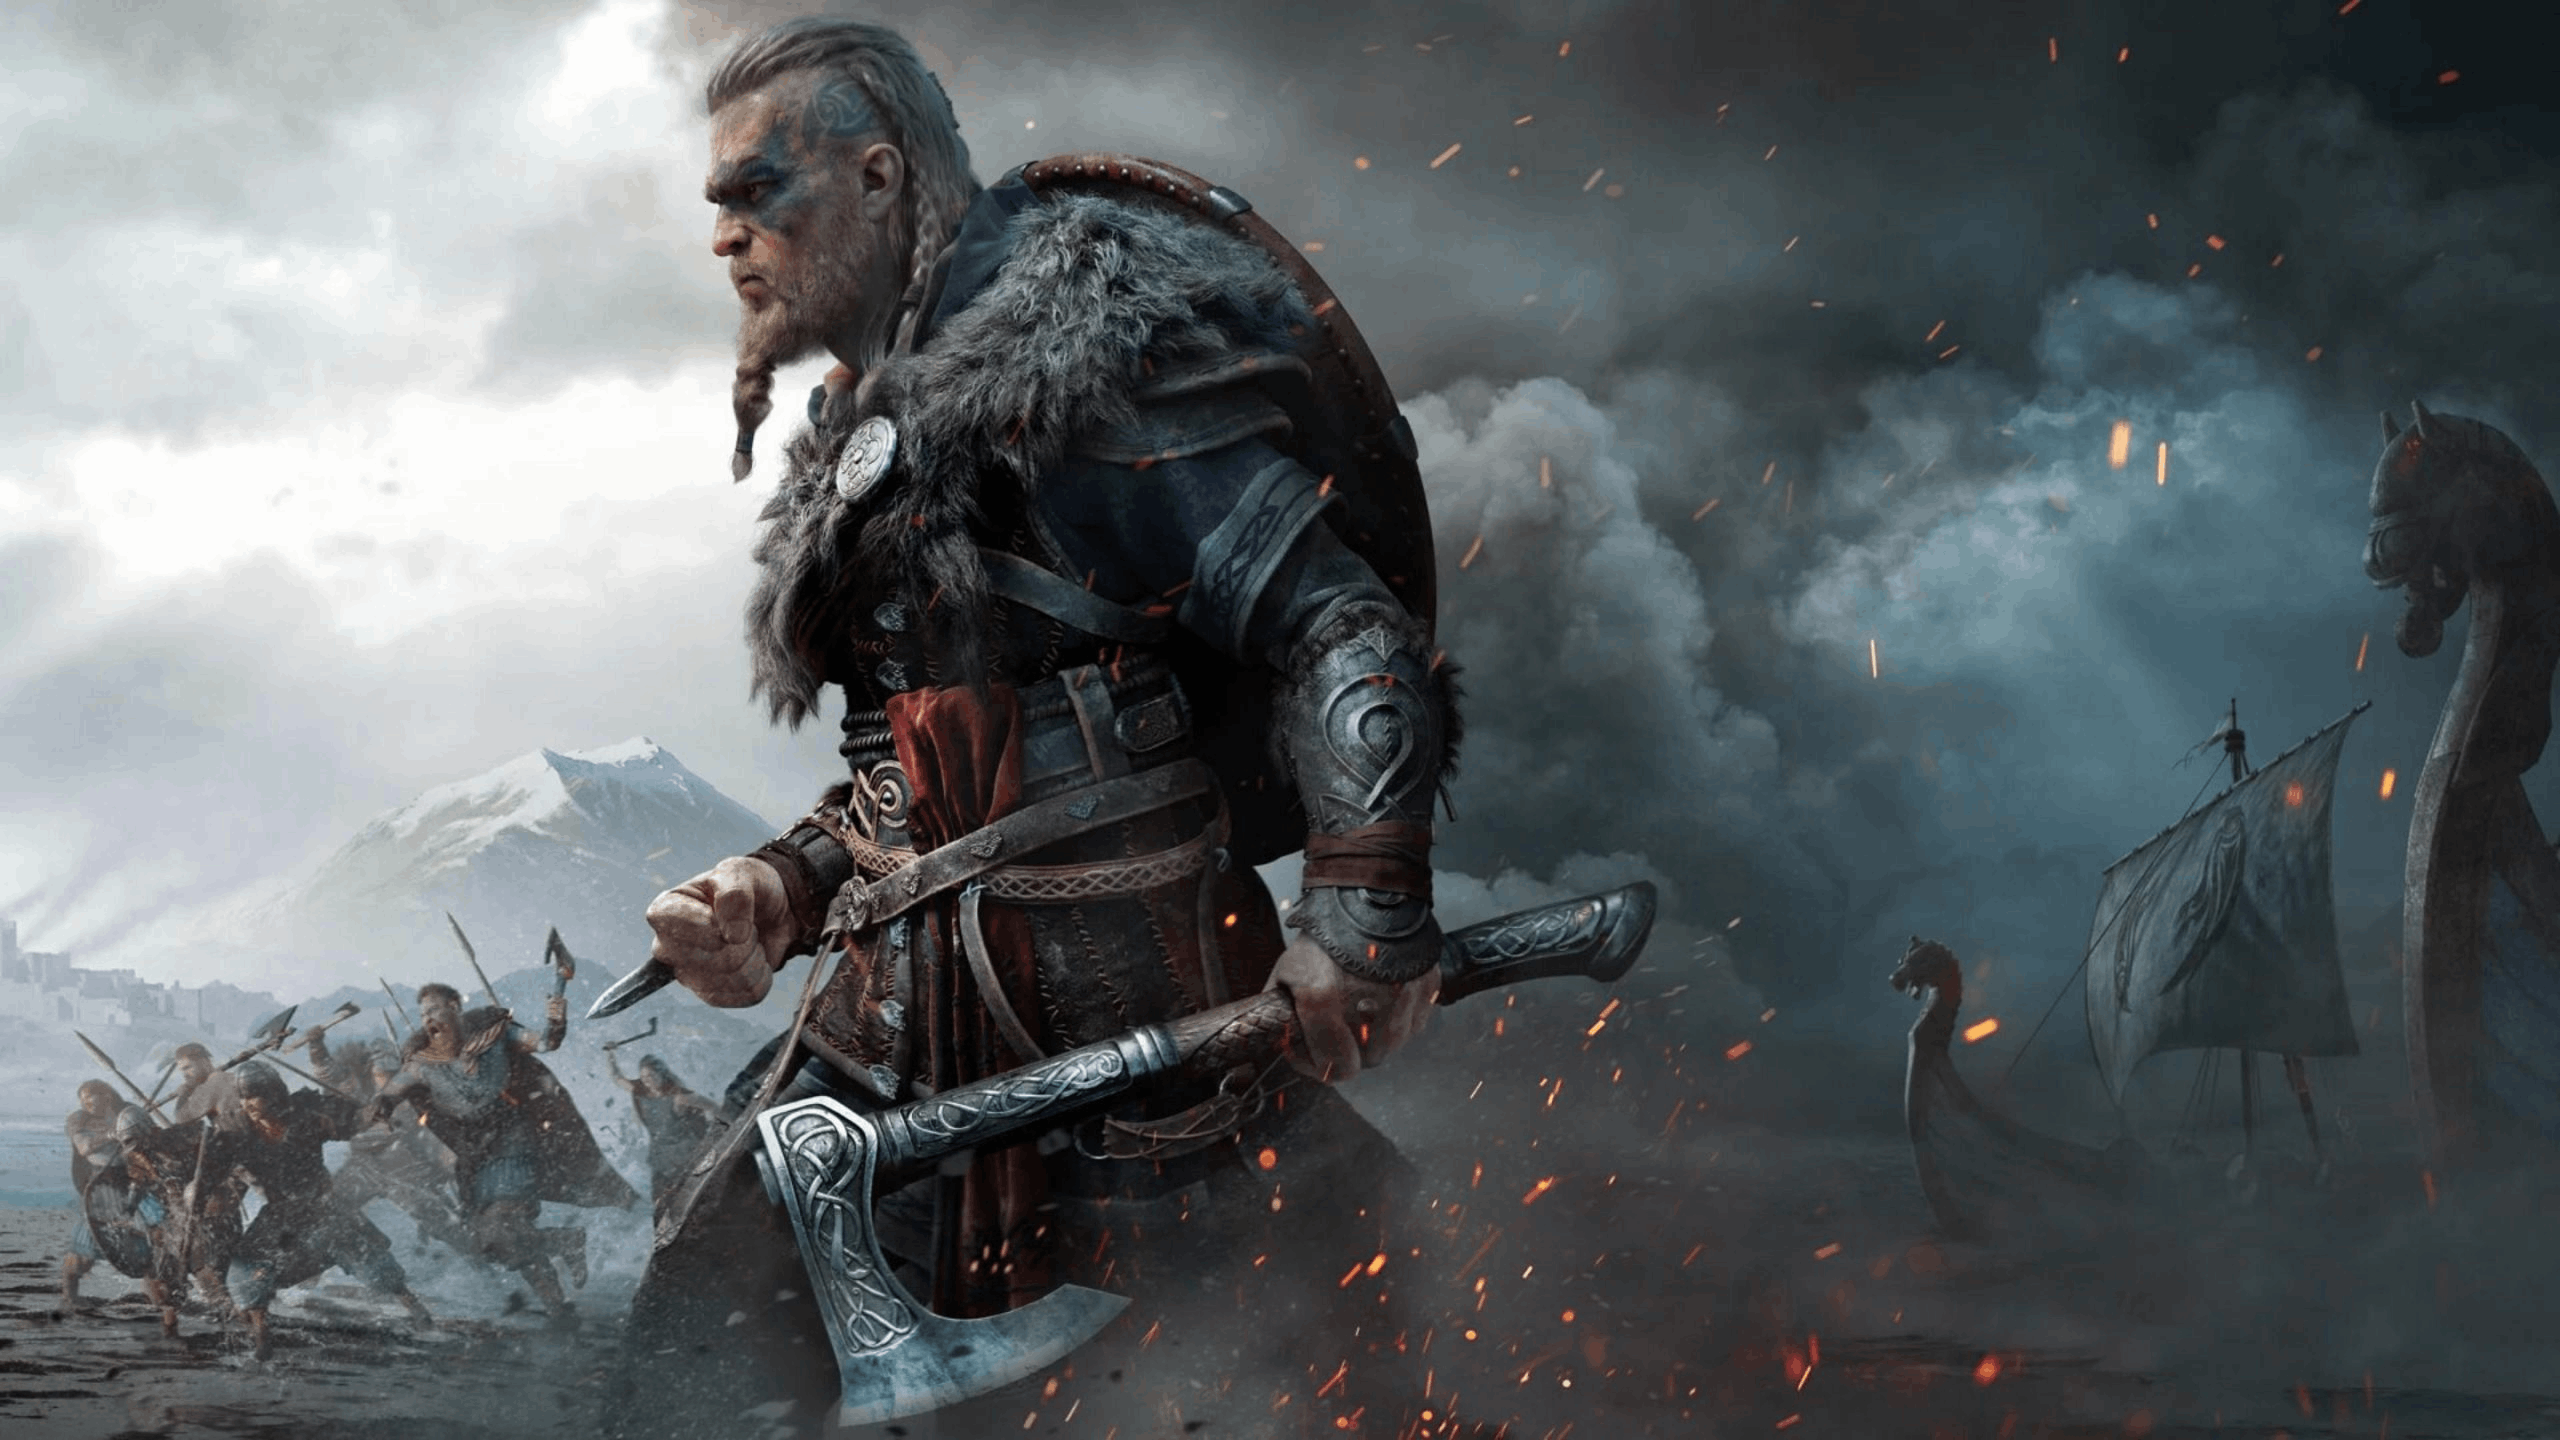 ASSASSIN'S CREED VALHALLA FULL EDITION RELEASE DATE